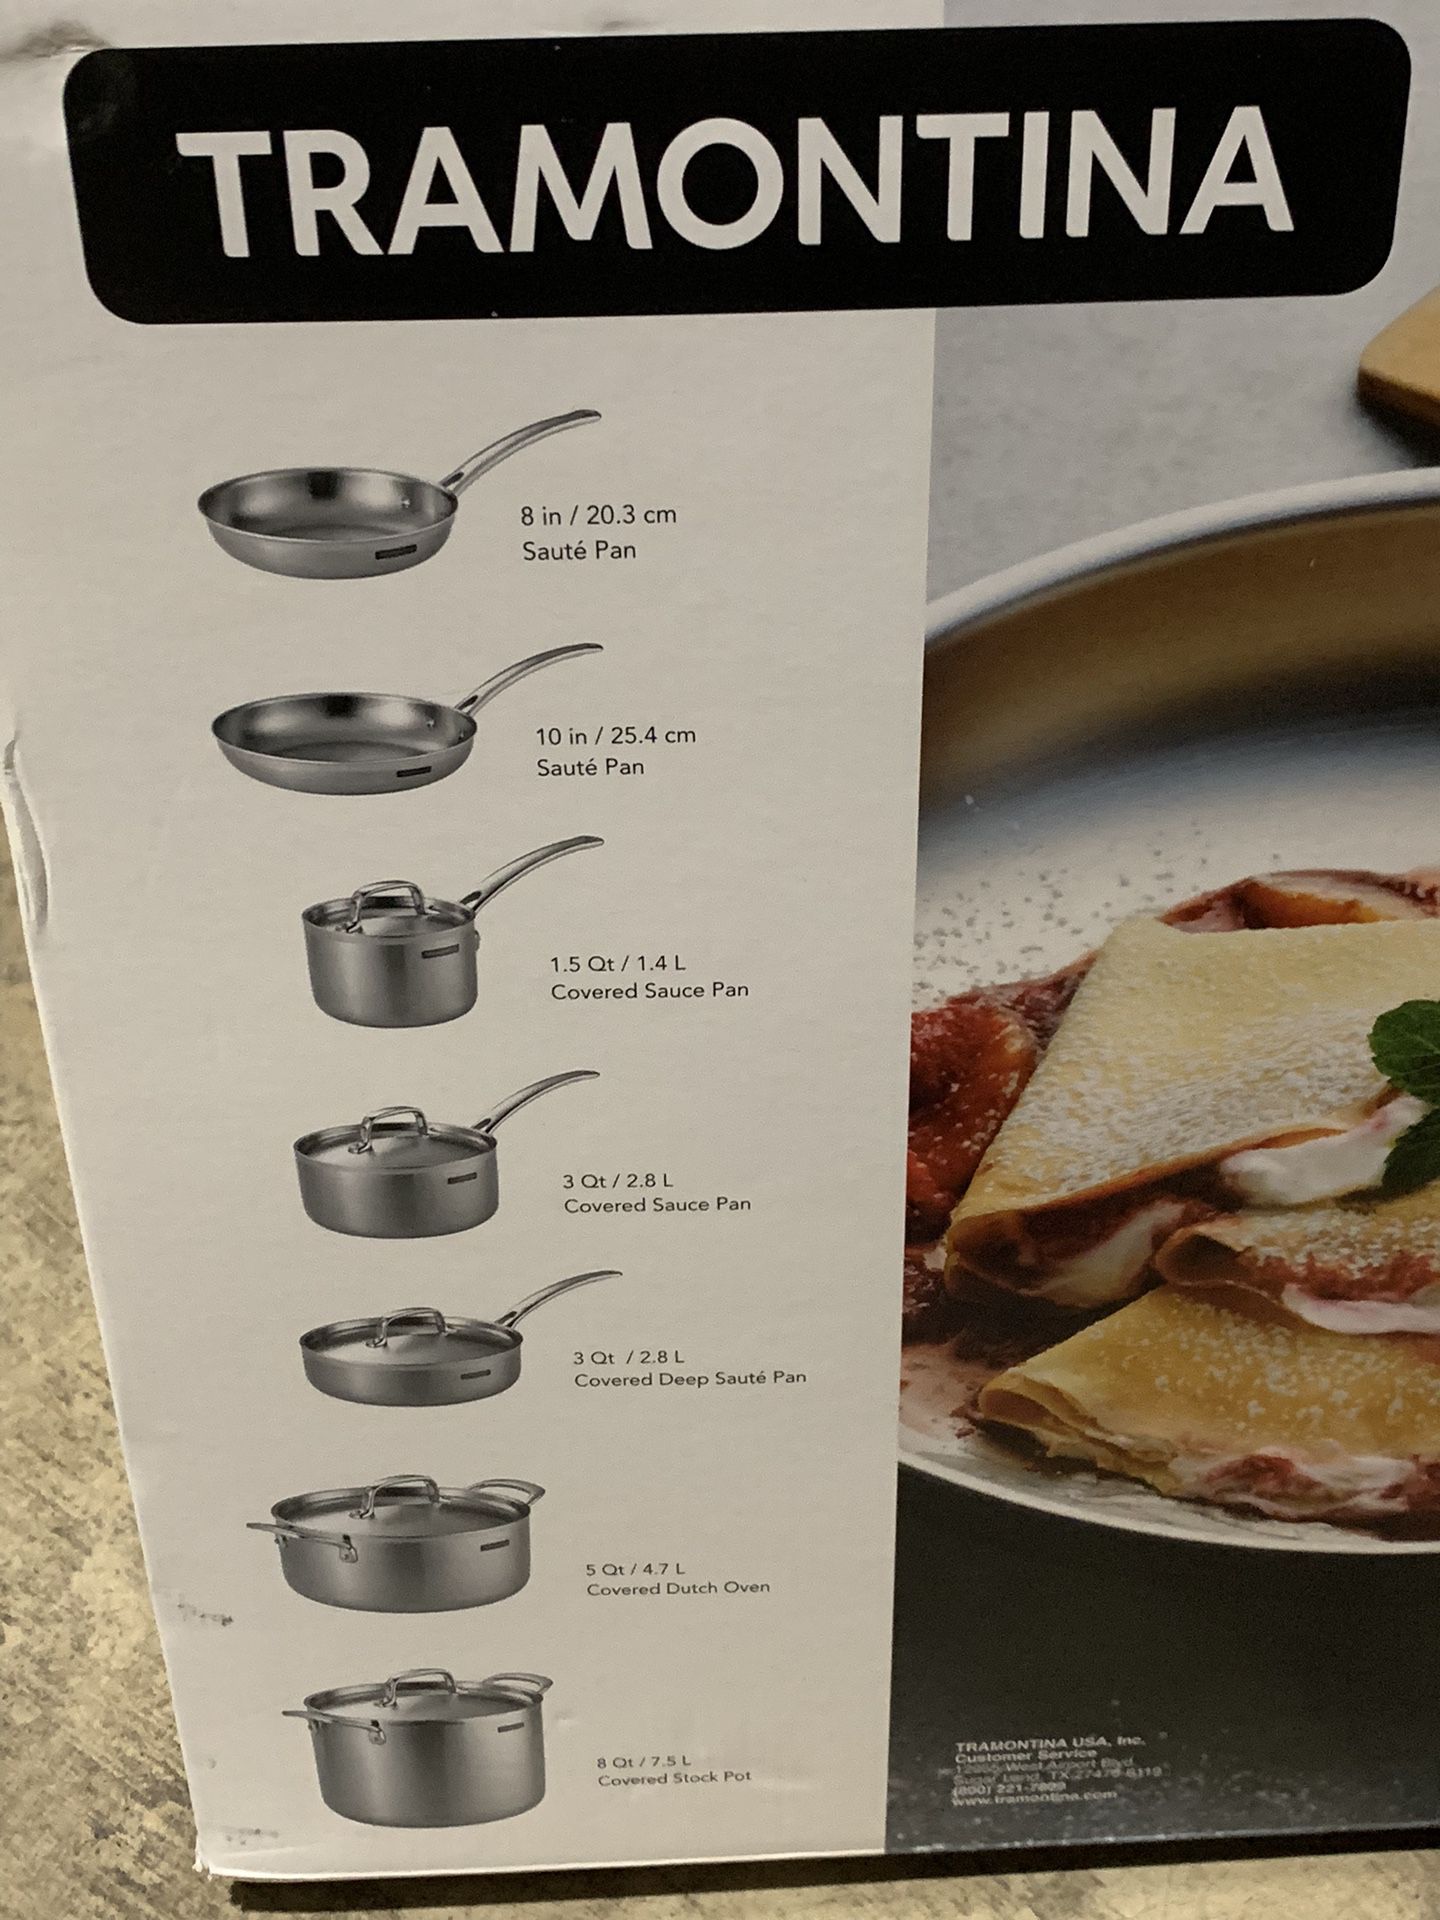 Tramontina 6-piece Stackable Sauce Pot Set for Sale in Greeley, CO - OfferUp